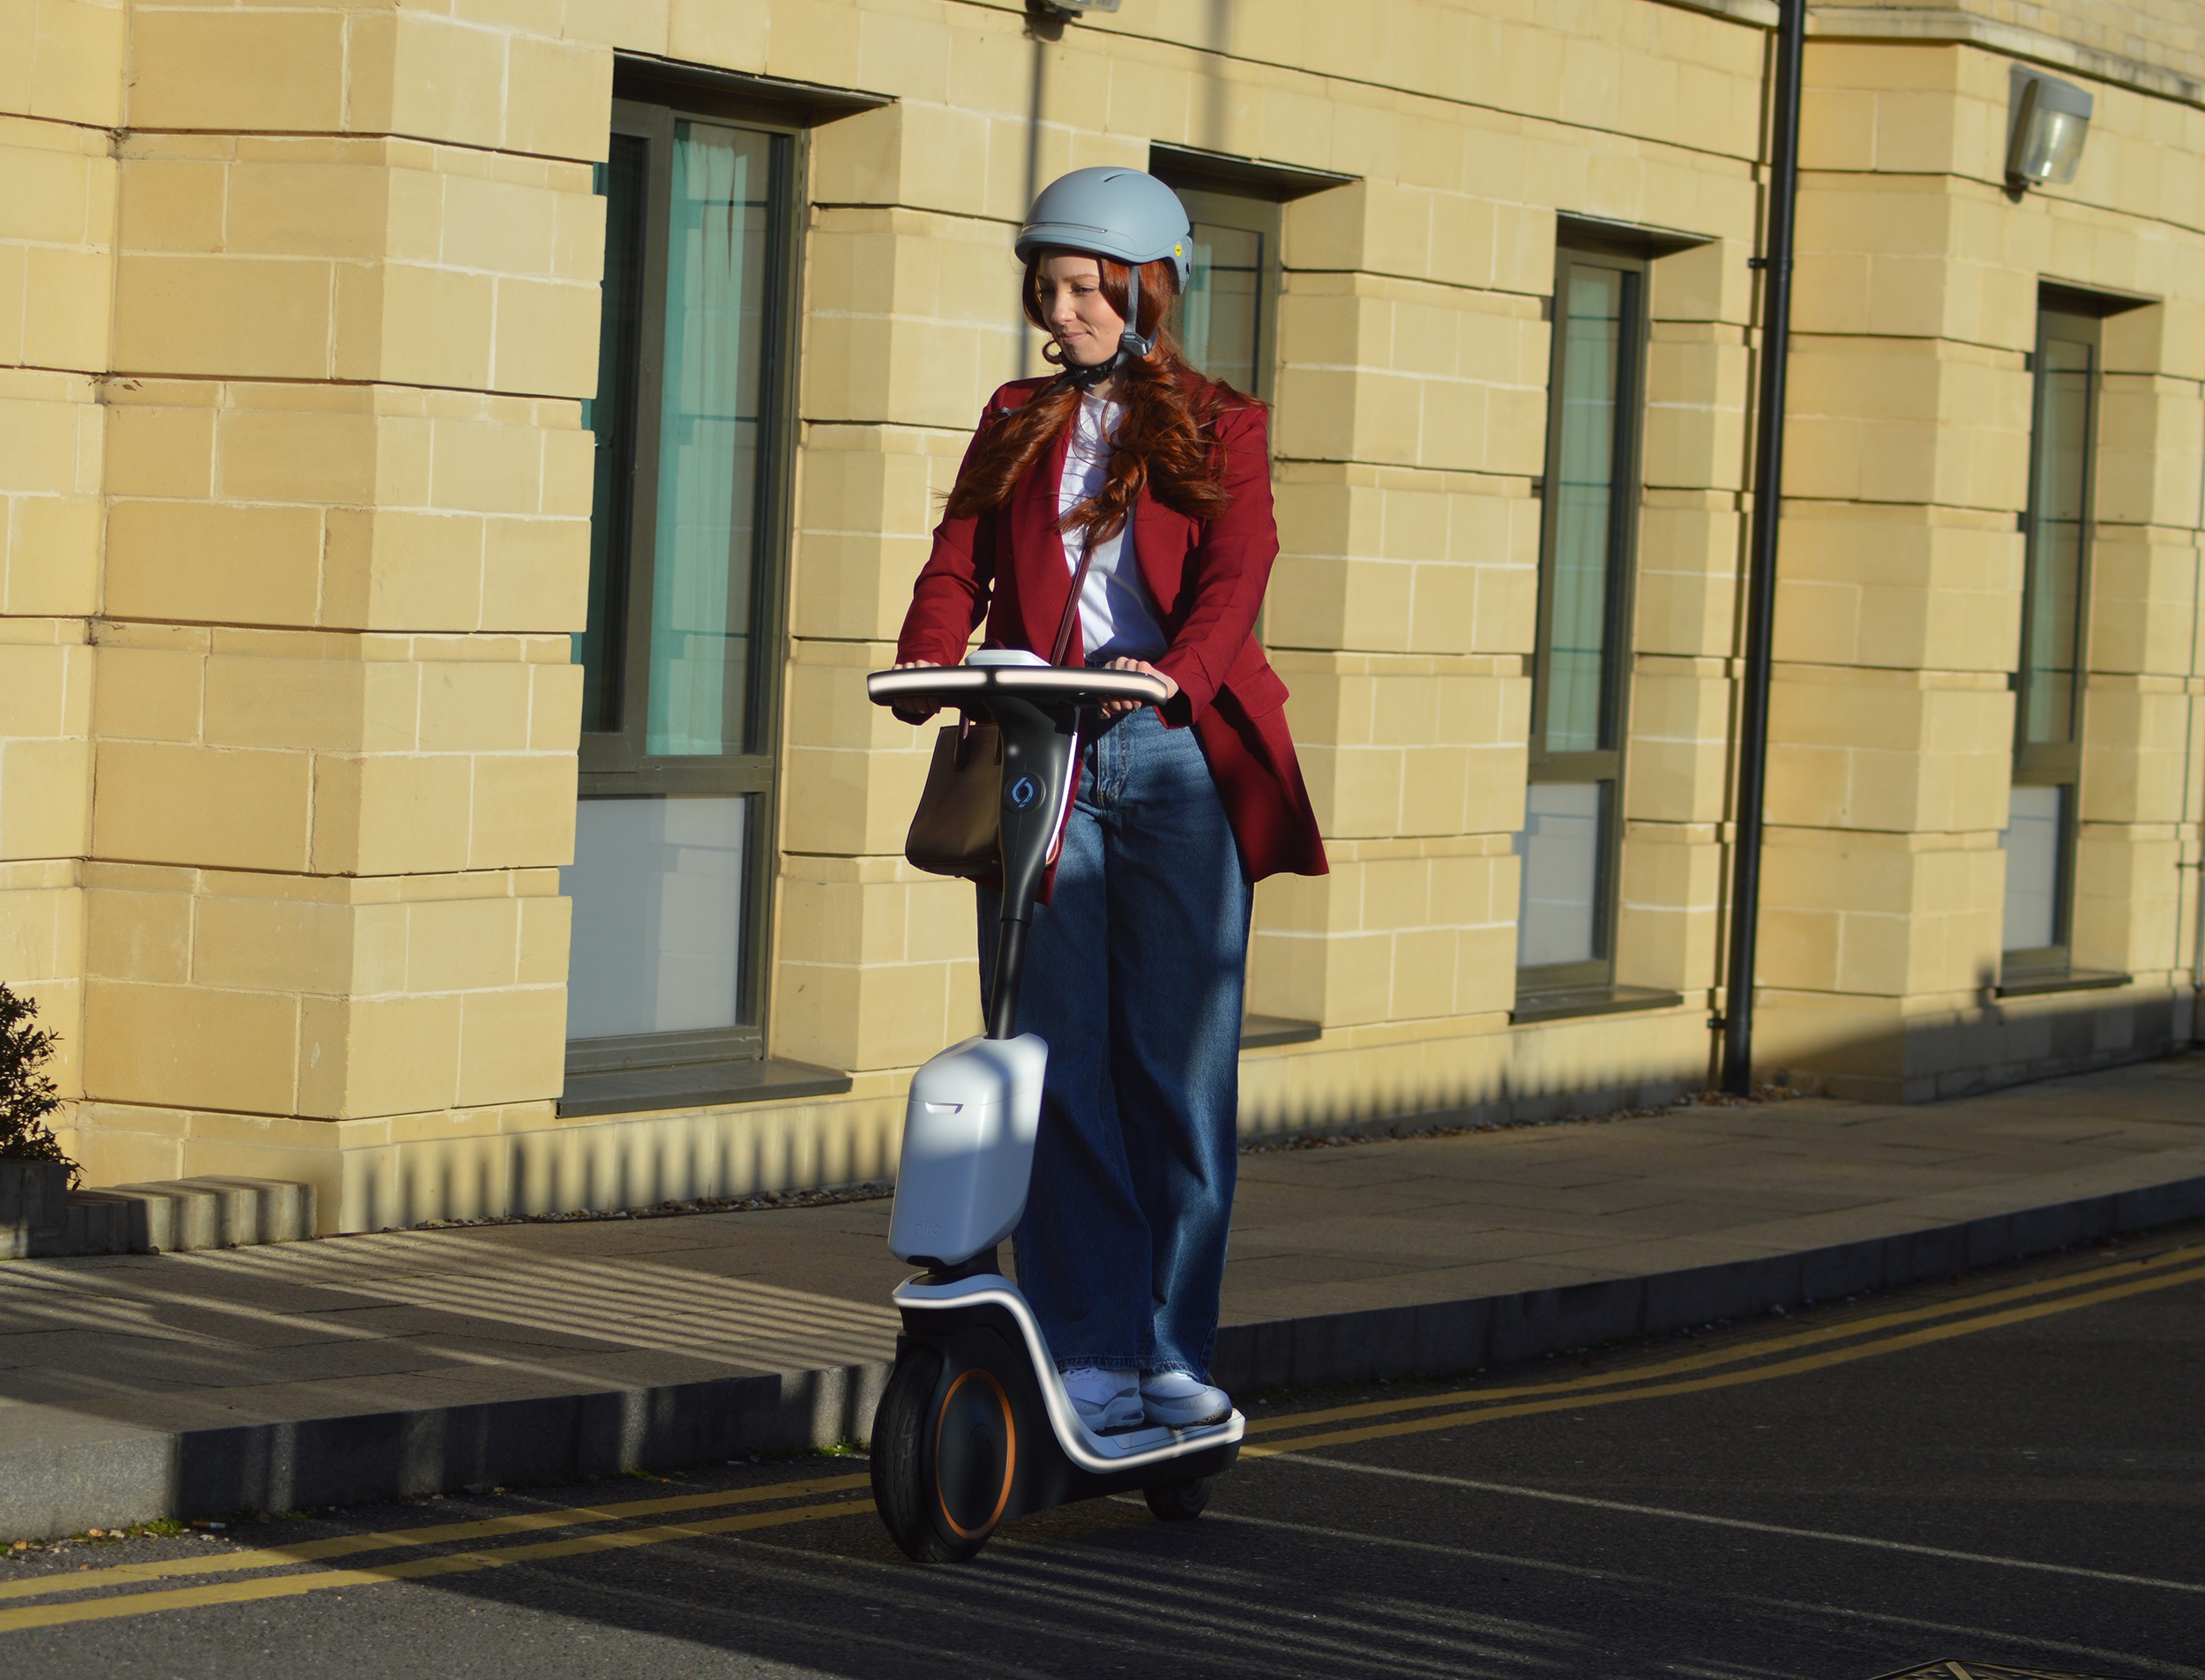 Micromobility AI road safety investment start-up prototype e-scooter (image: Hilo EV)